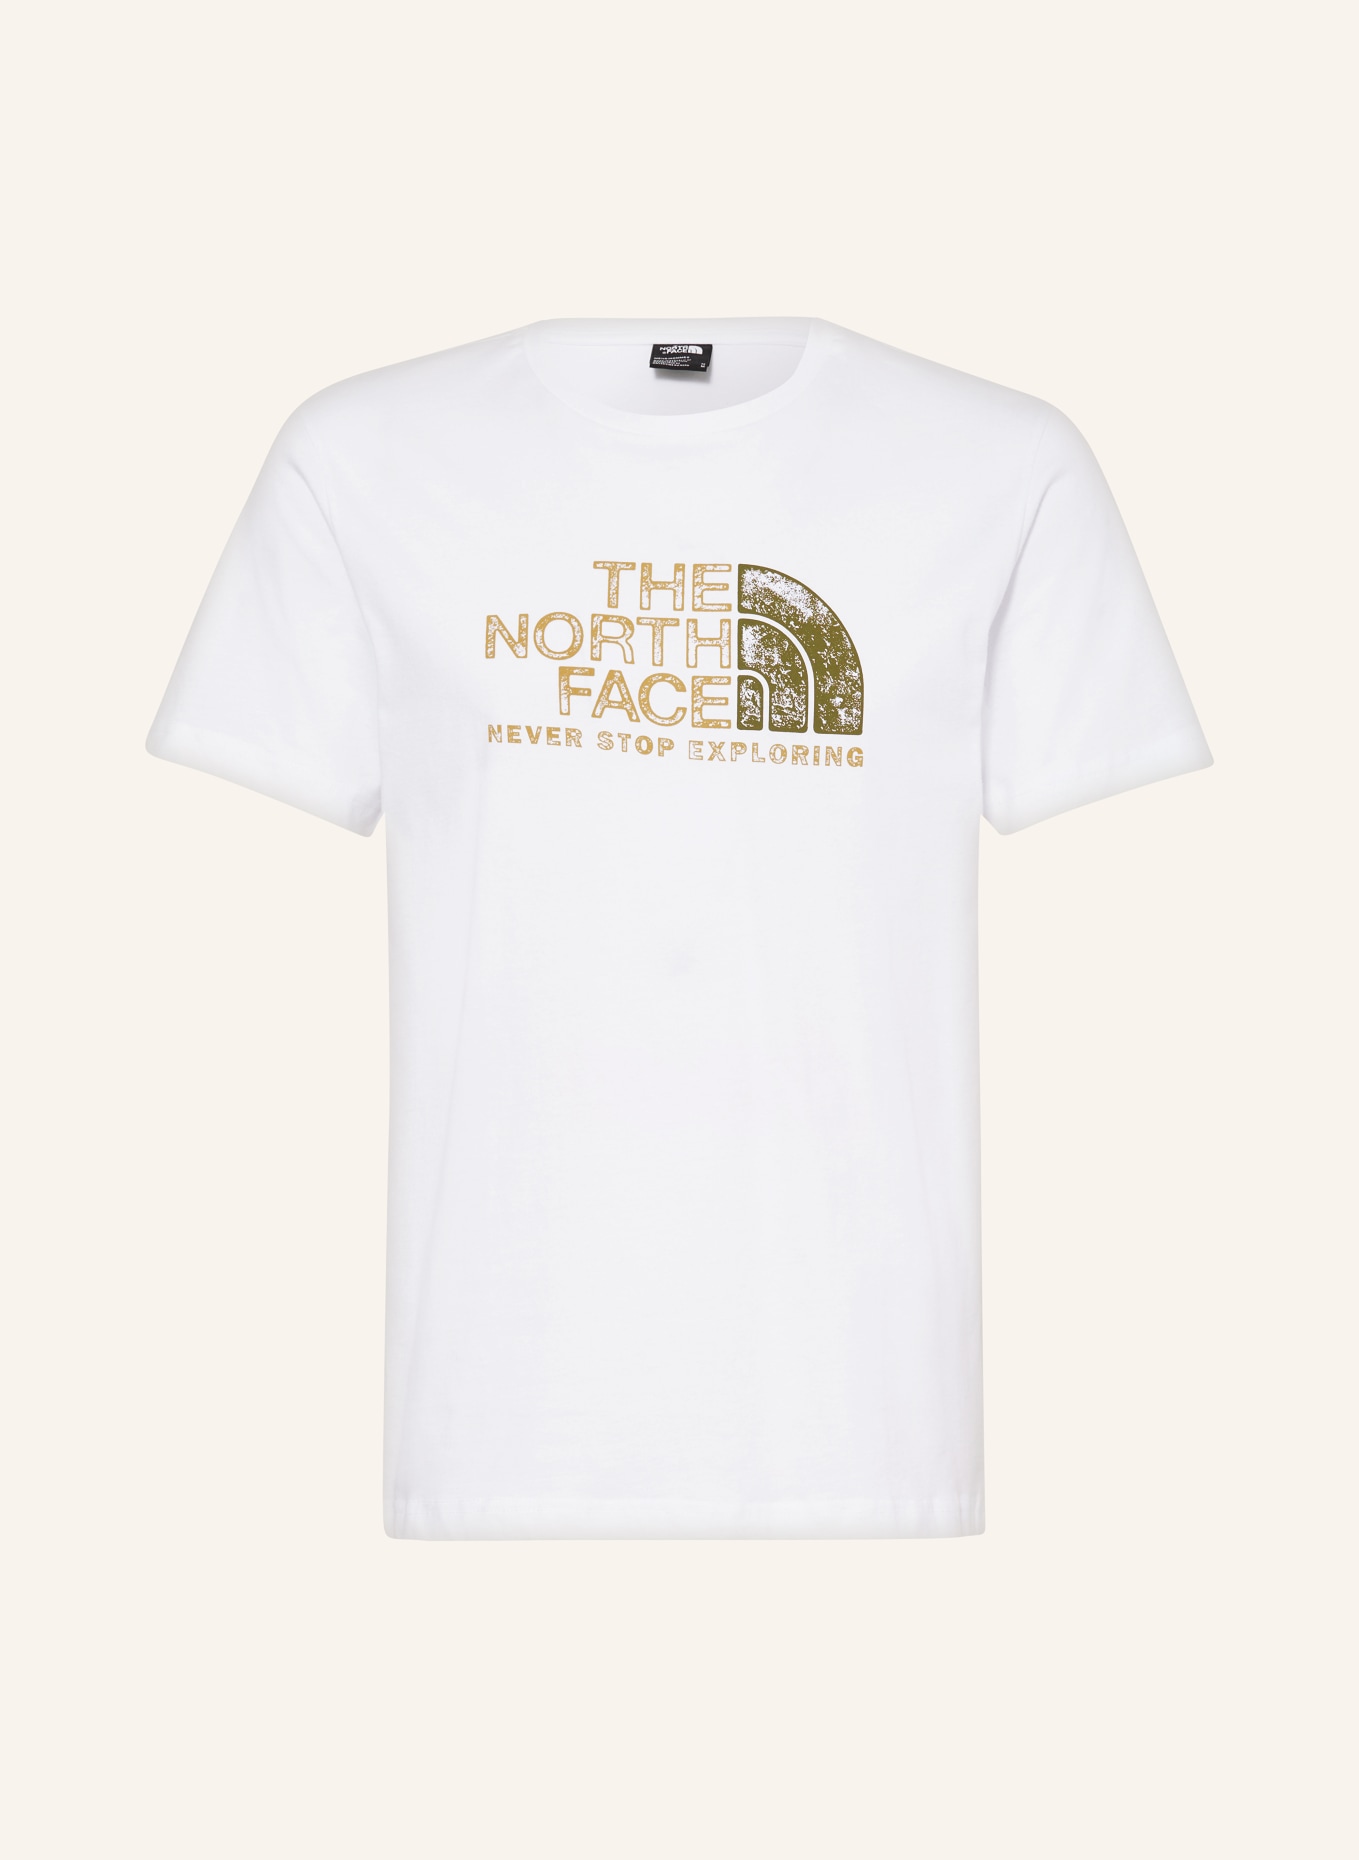 THE NORTH FACE T-Shirt, Farbe: WEISS (Bild 1)